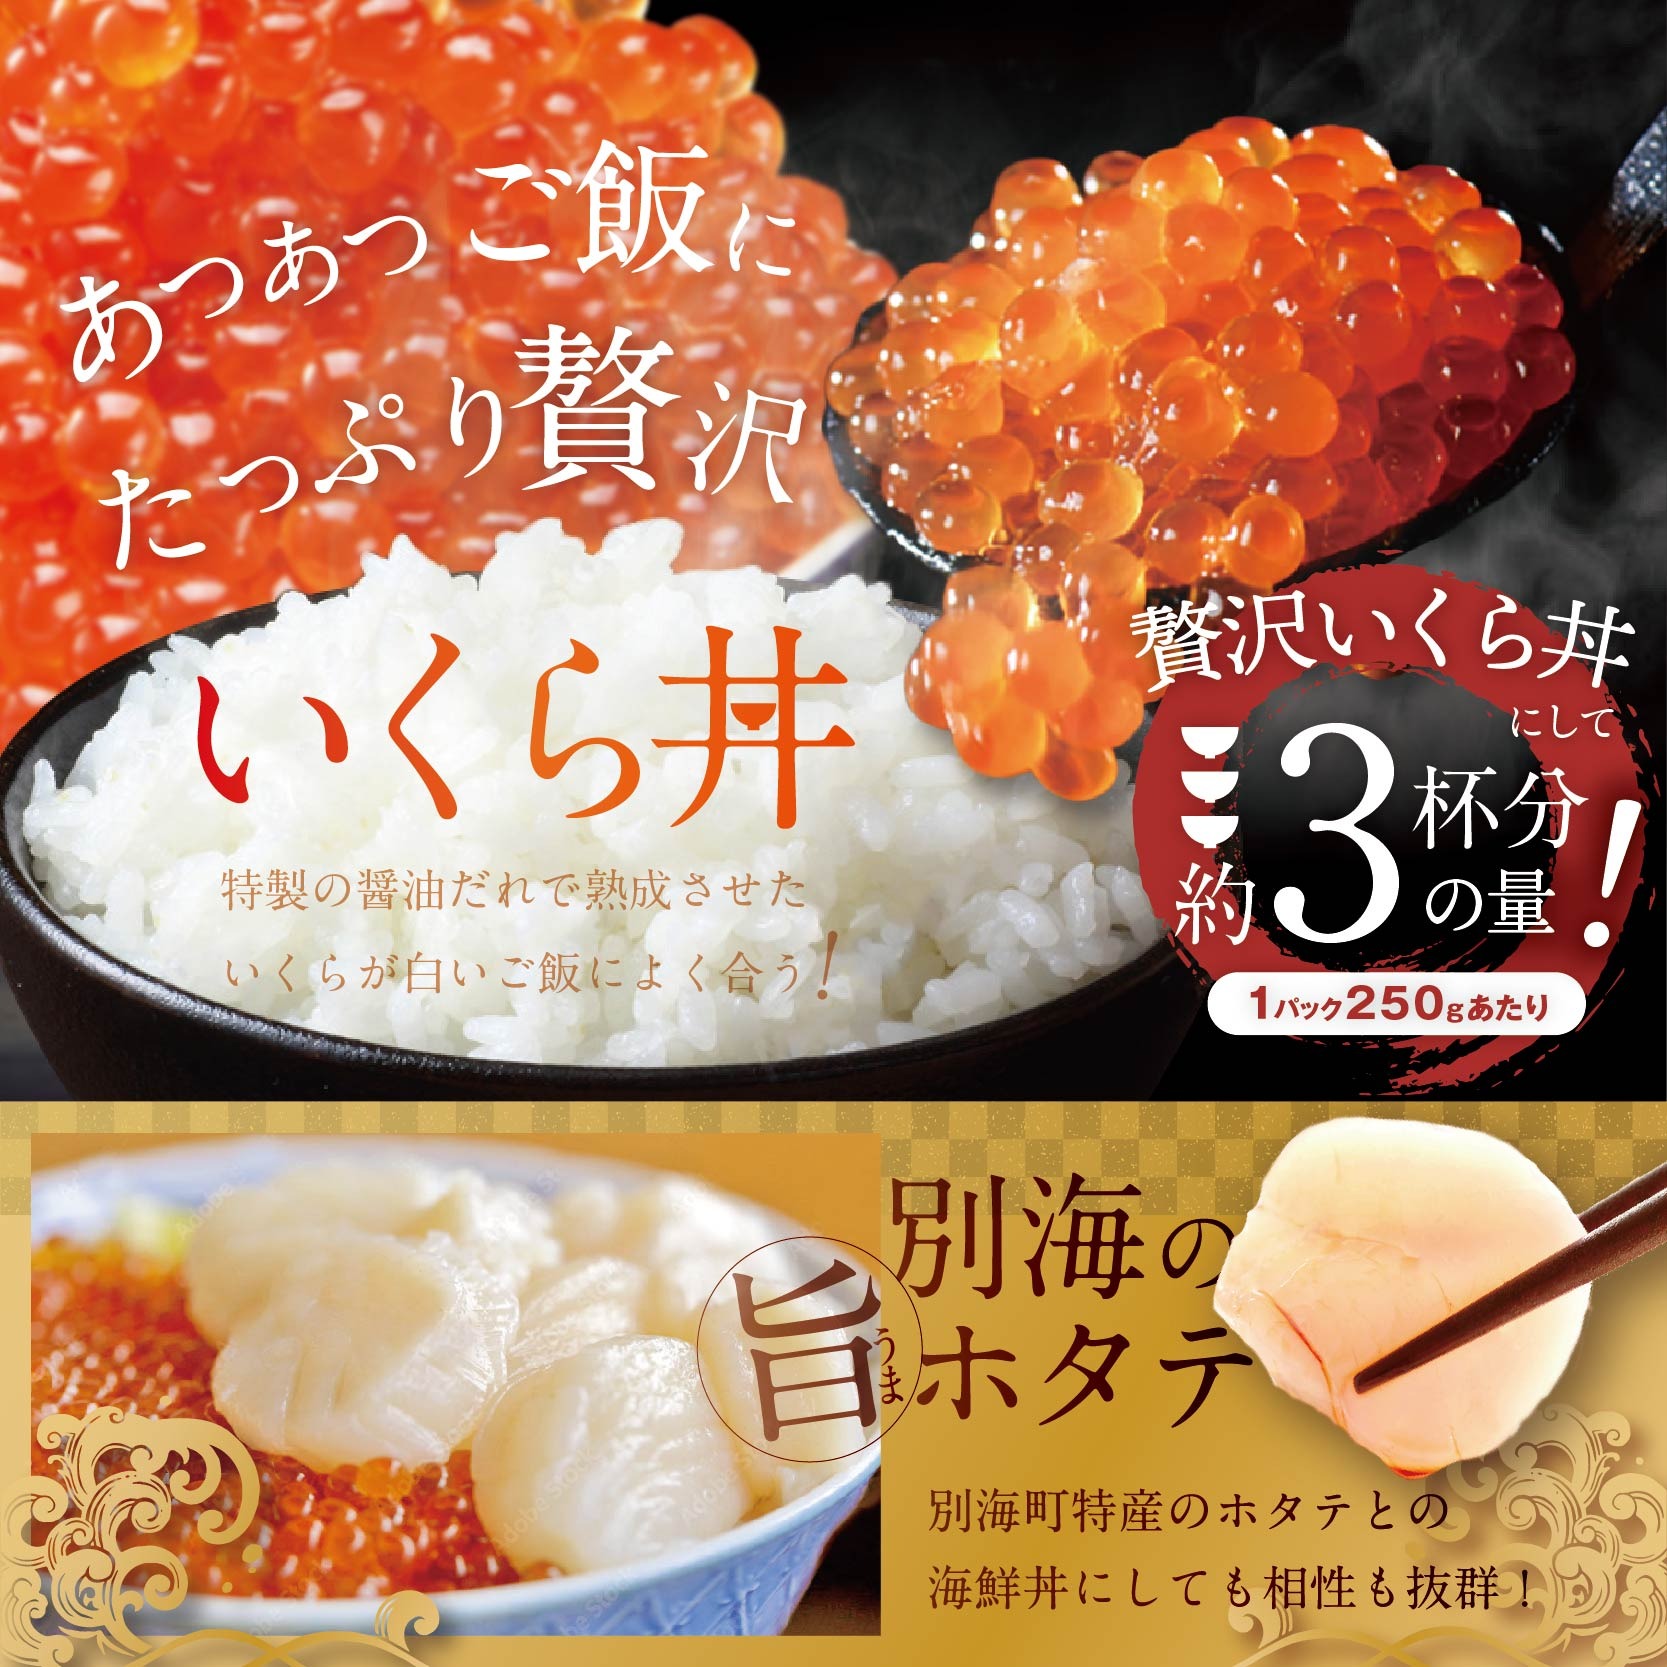 【JAL限定】いくらは国産・北海道産 鮭 いくら醤油漬け 250g（ いくら いくら醤油漬け いくら醤油漬 醤油いくら 国産いくら 道産いくら）